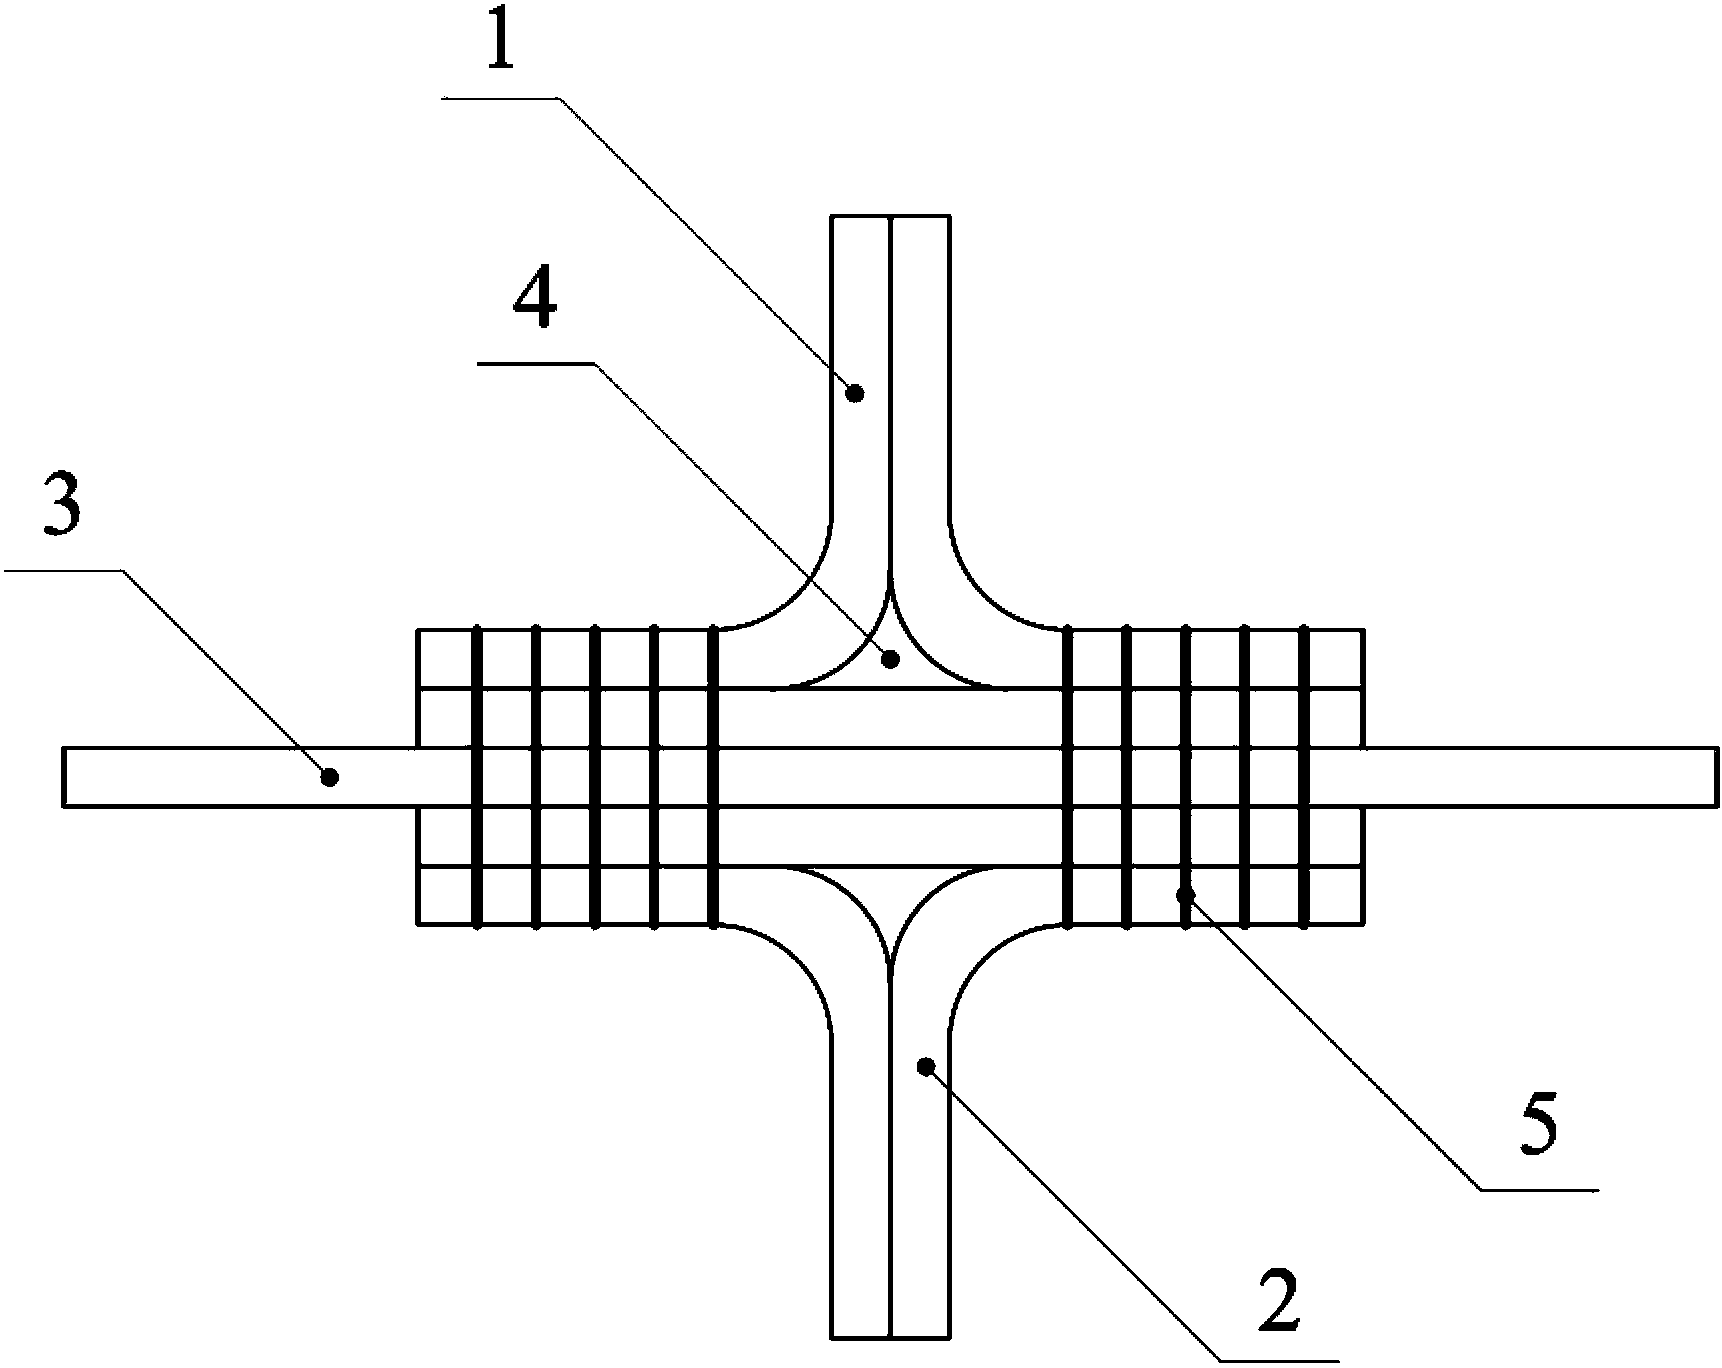 Integral forming method for sewing enhanced cross connector made of fiber reinforced resin matrix composite